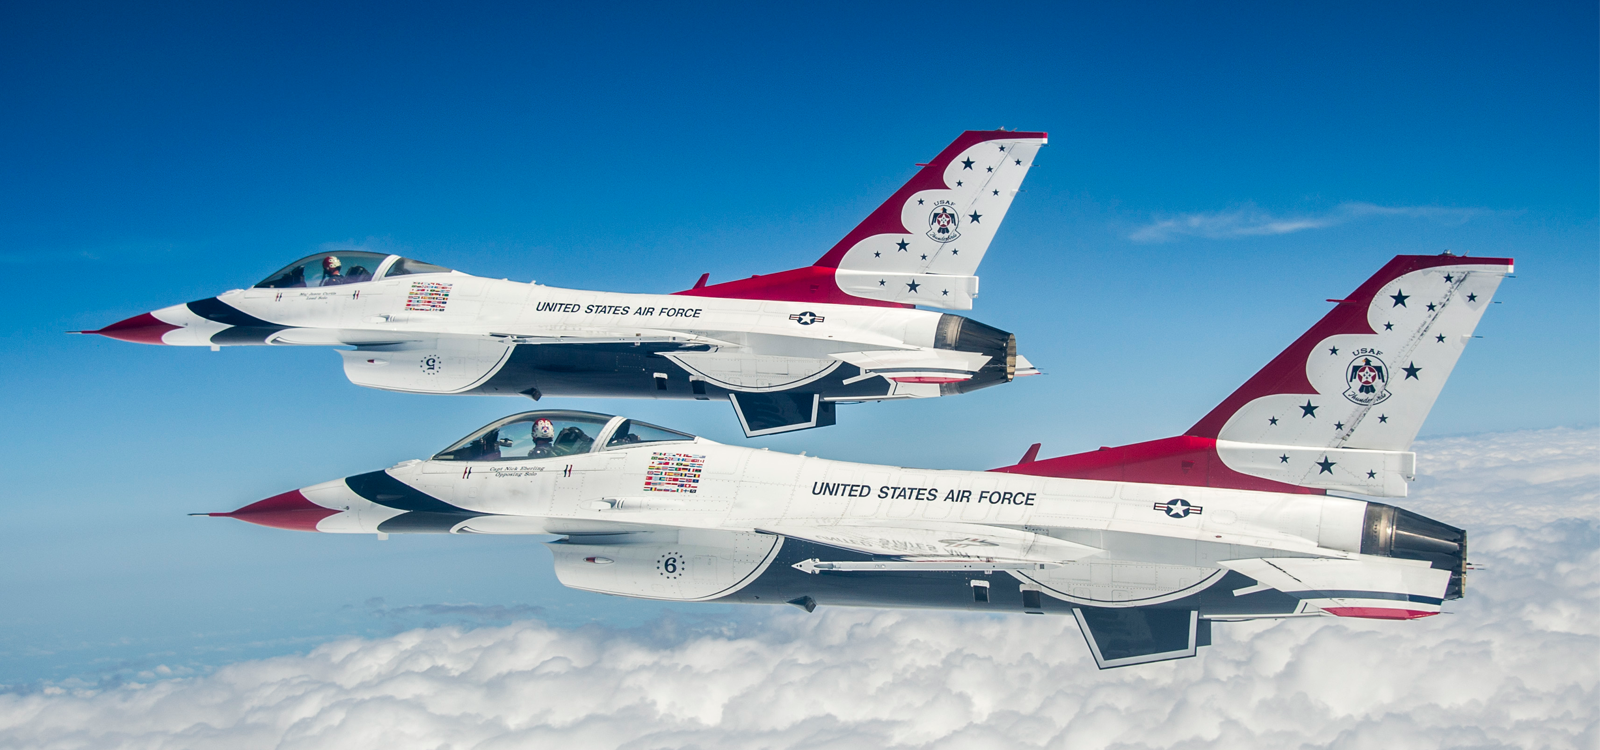 United States Air Force Thunderbirds #13